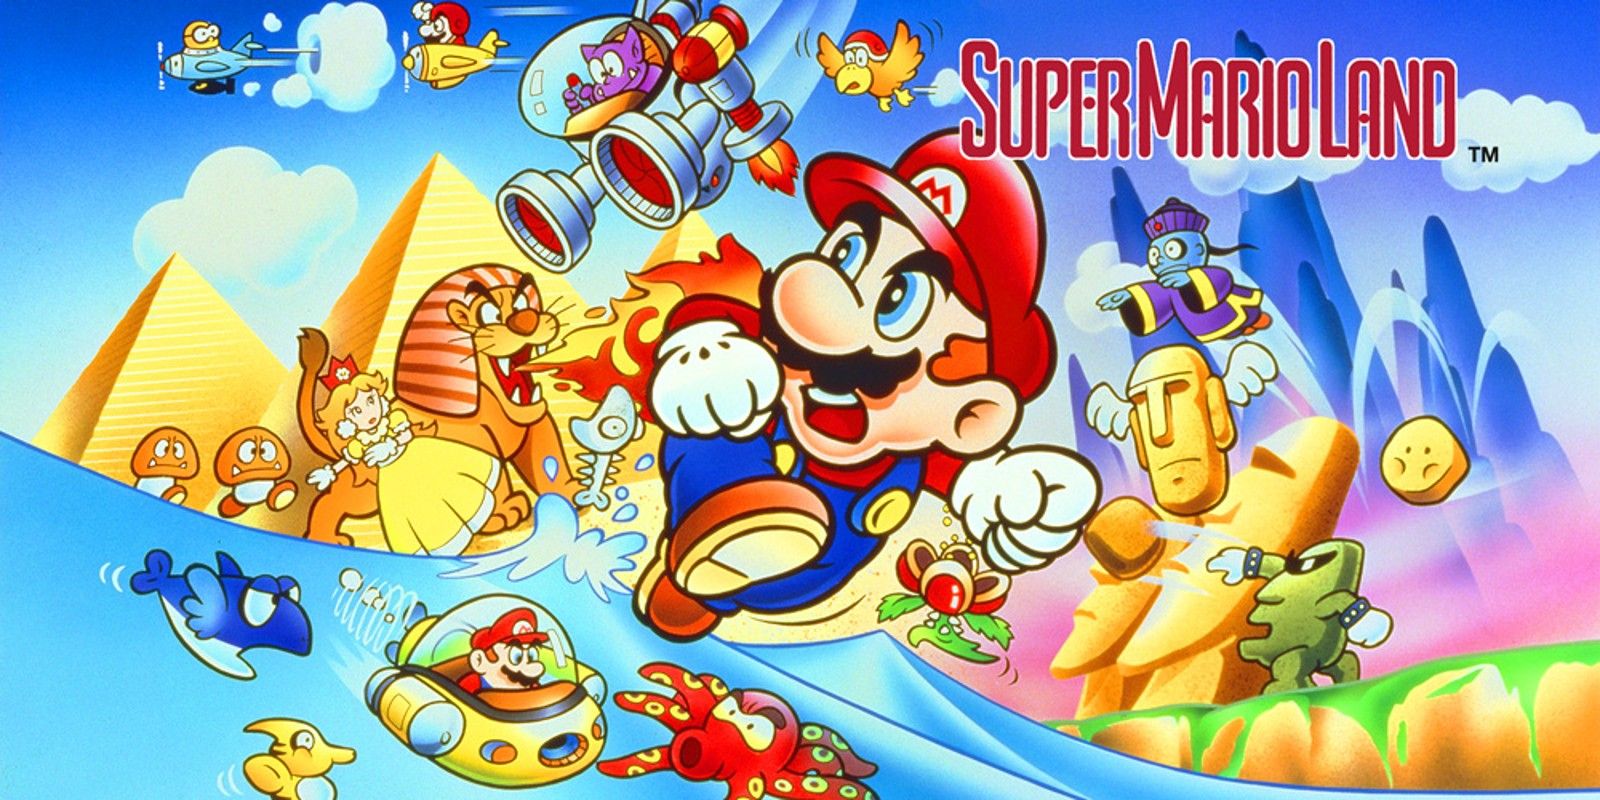 A banner image with art from Mario, Daisy, and various enemies from Super Mario Land.